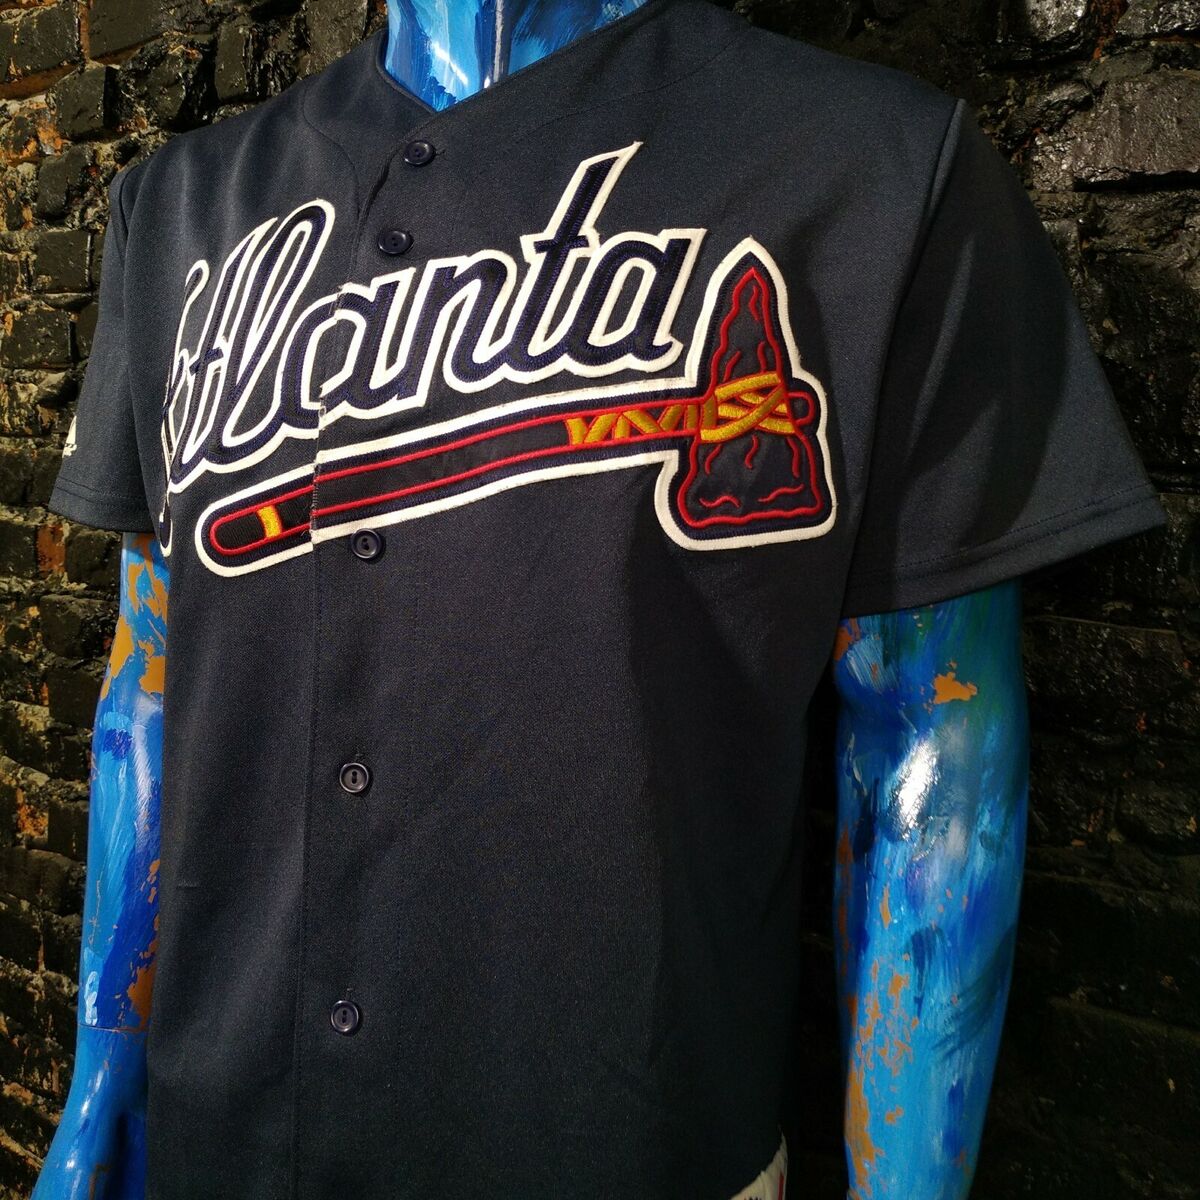 braves jersey outfit men